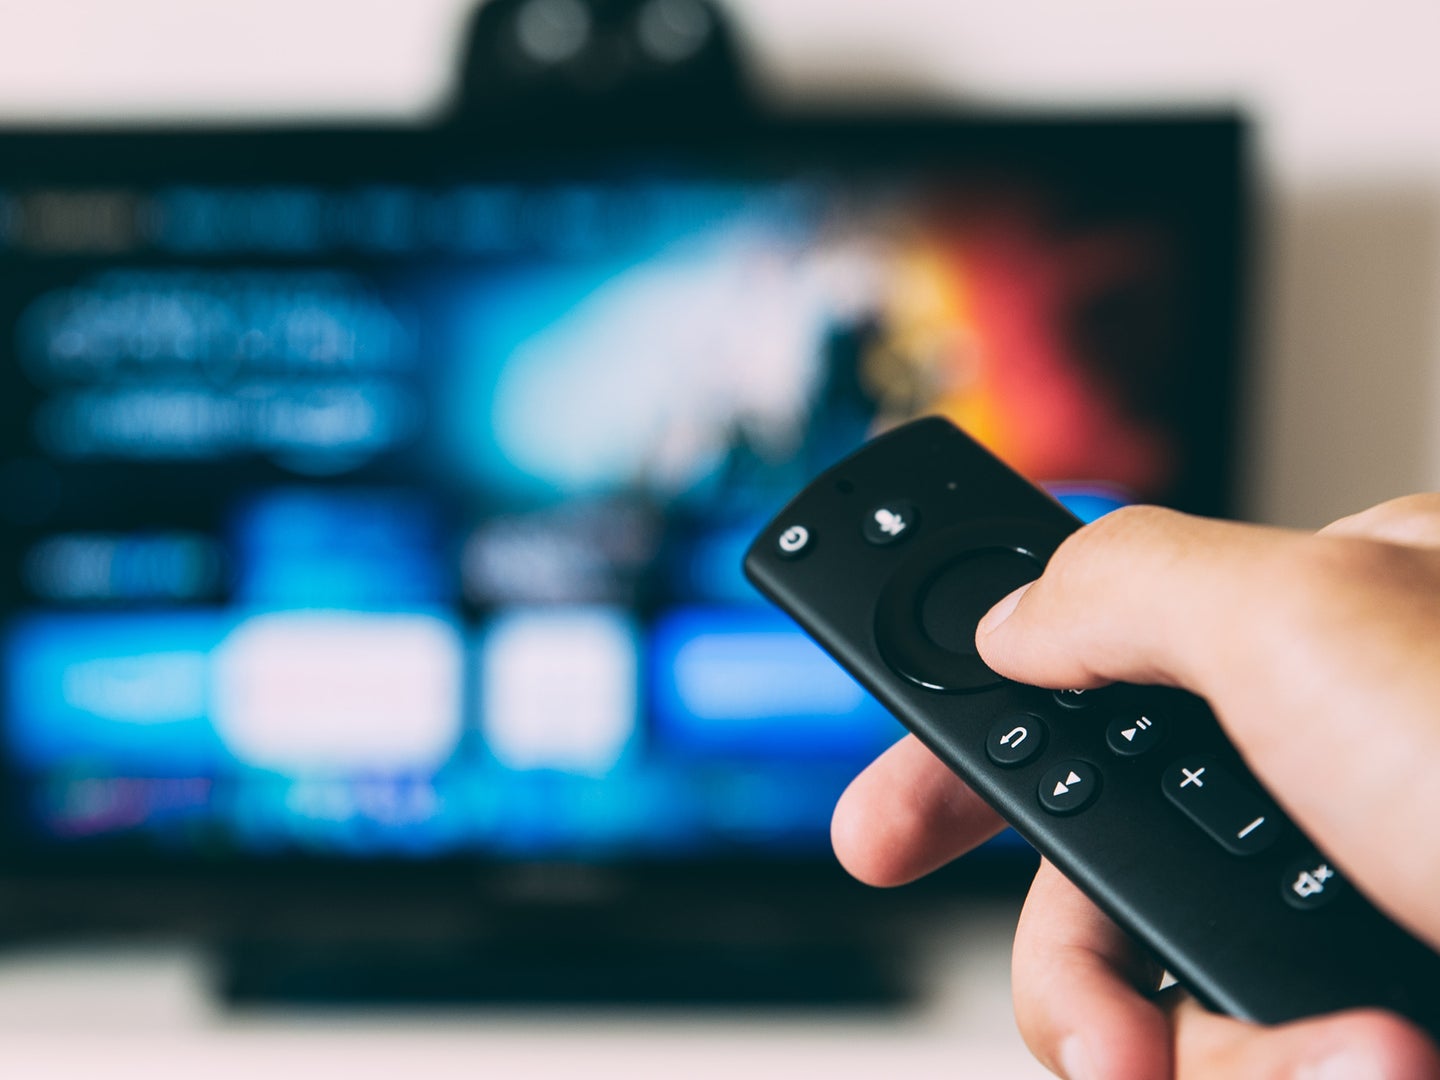 Hand holding Amazon Fire TV remote towards TV screen